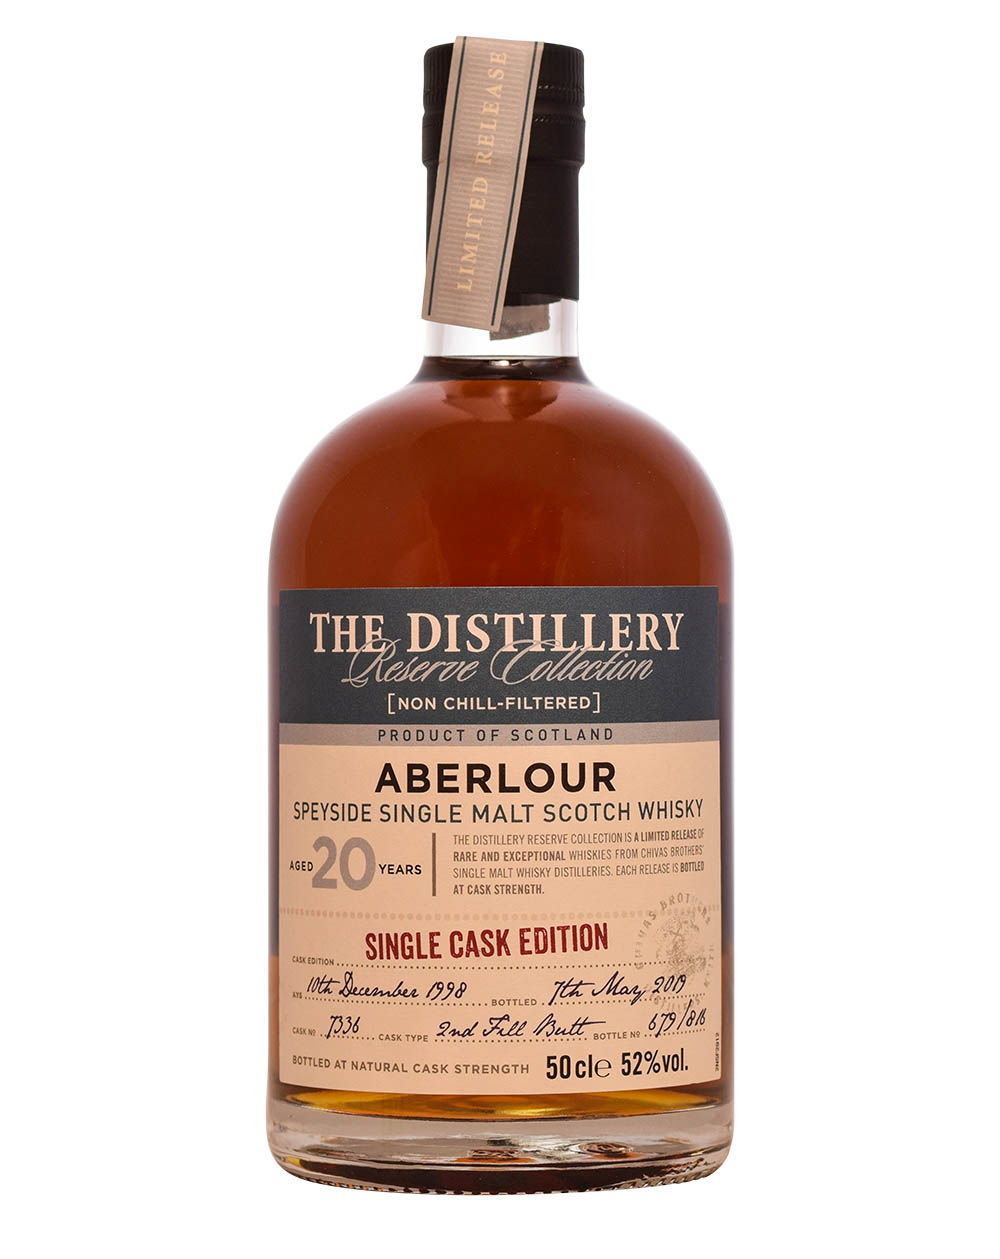 Aberlour 20 Years Old Distillery Reserve Collection Cask 7336 1998